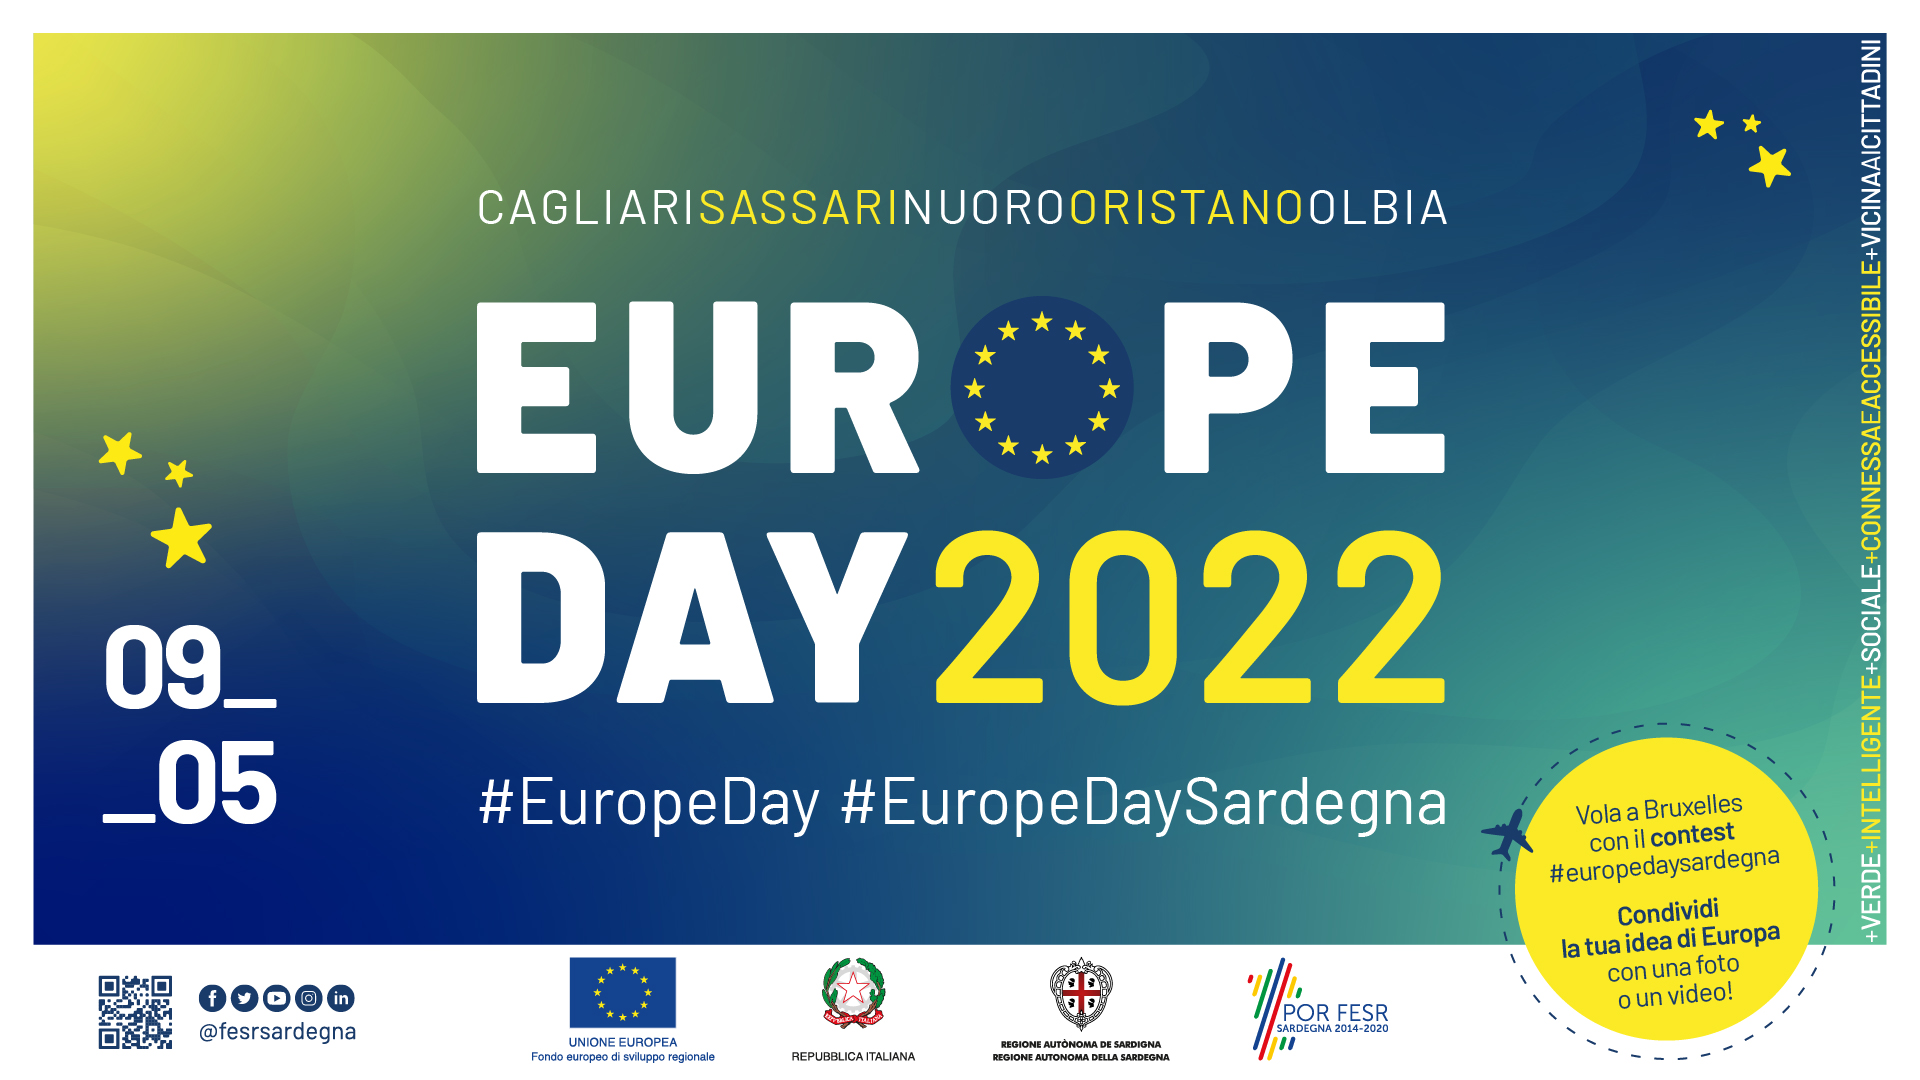 Europe day 2022